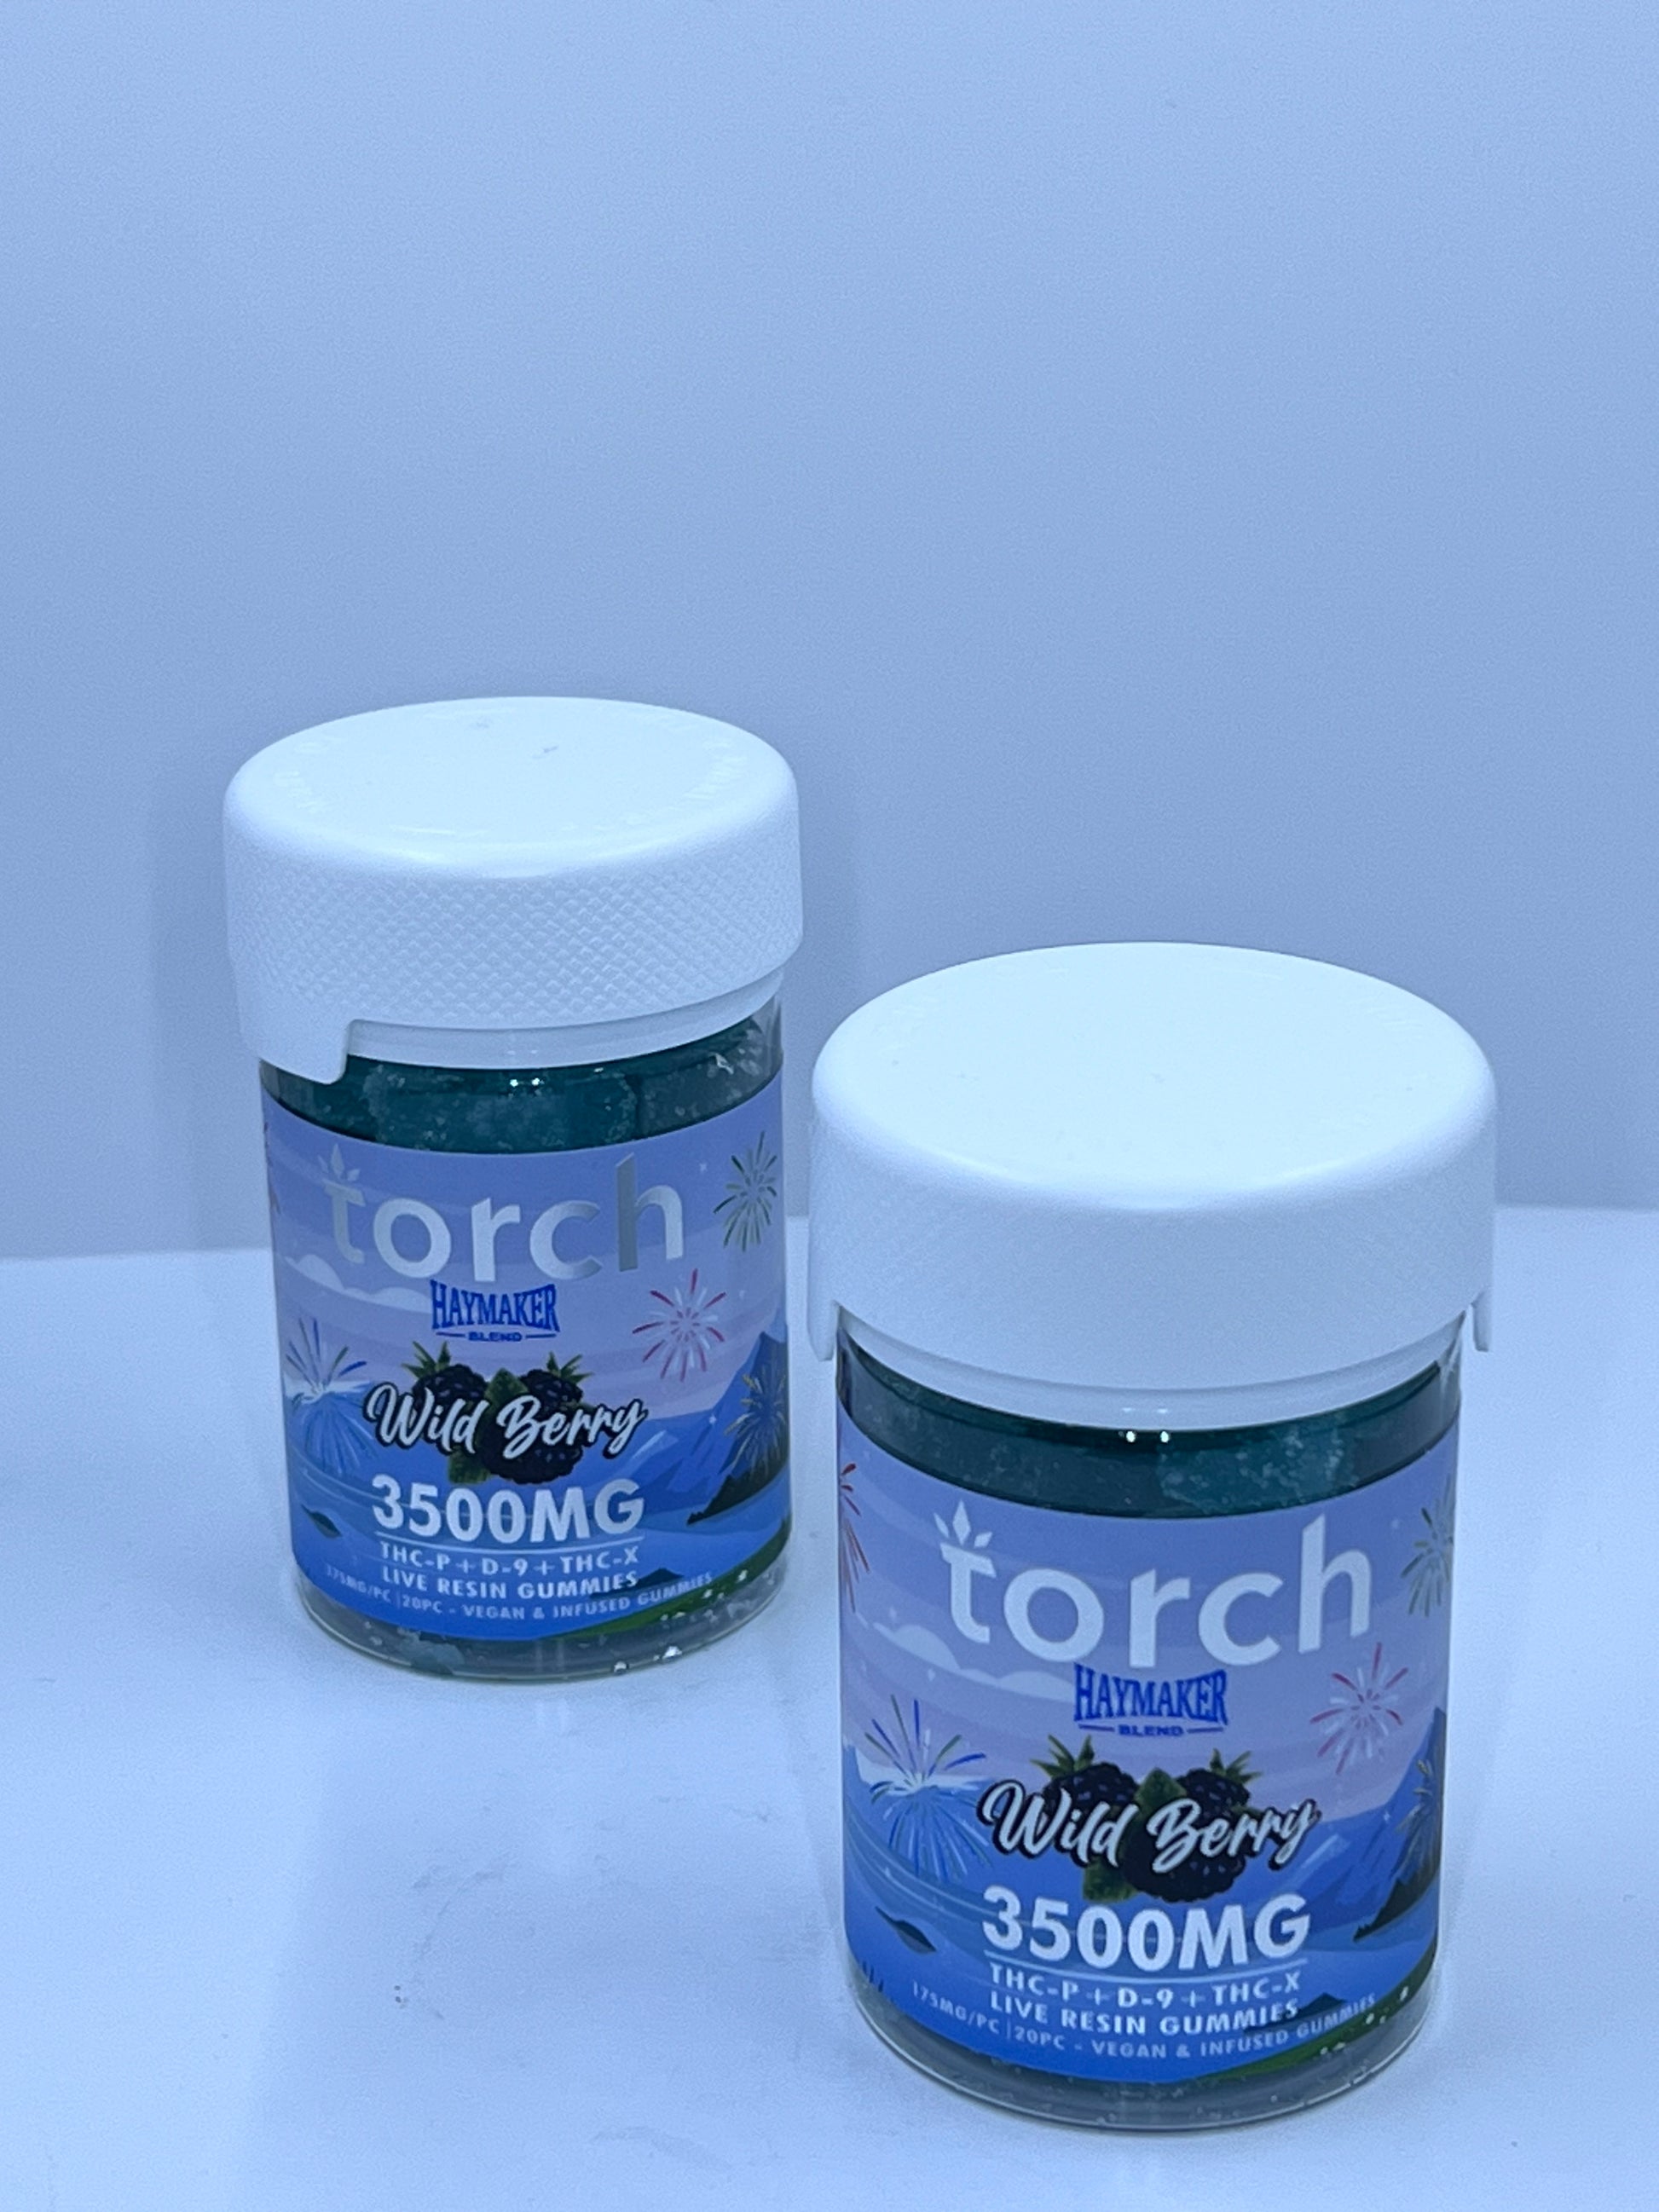 Torch Haymaker Gummies 3500MG yoga smokes yoga studio, delivery, delivery near me, yoga smokes smoke shop, find smoke shop, head shop near me, yoga studio, headshop, head shop, local smoke shop, psl, psl smoke shop, smoke shop, smokeshop, yoga, yoga studio, dispensary, local dispensary, smokeshop near me, port saint lucie, florida, port st lucie, lounge, life, highlife, love, stoned, highsociety. Yoga Smokes Wild Berry / 2-Pack